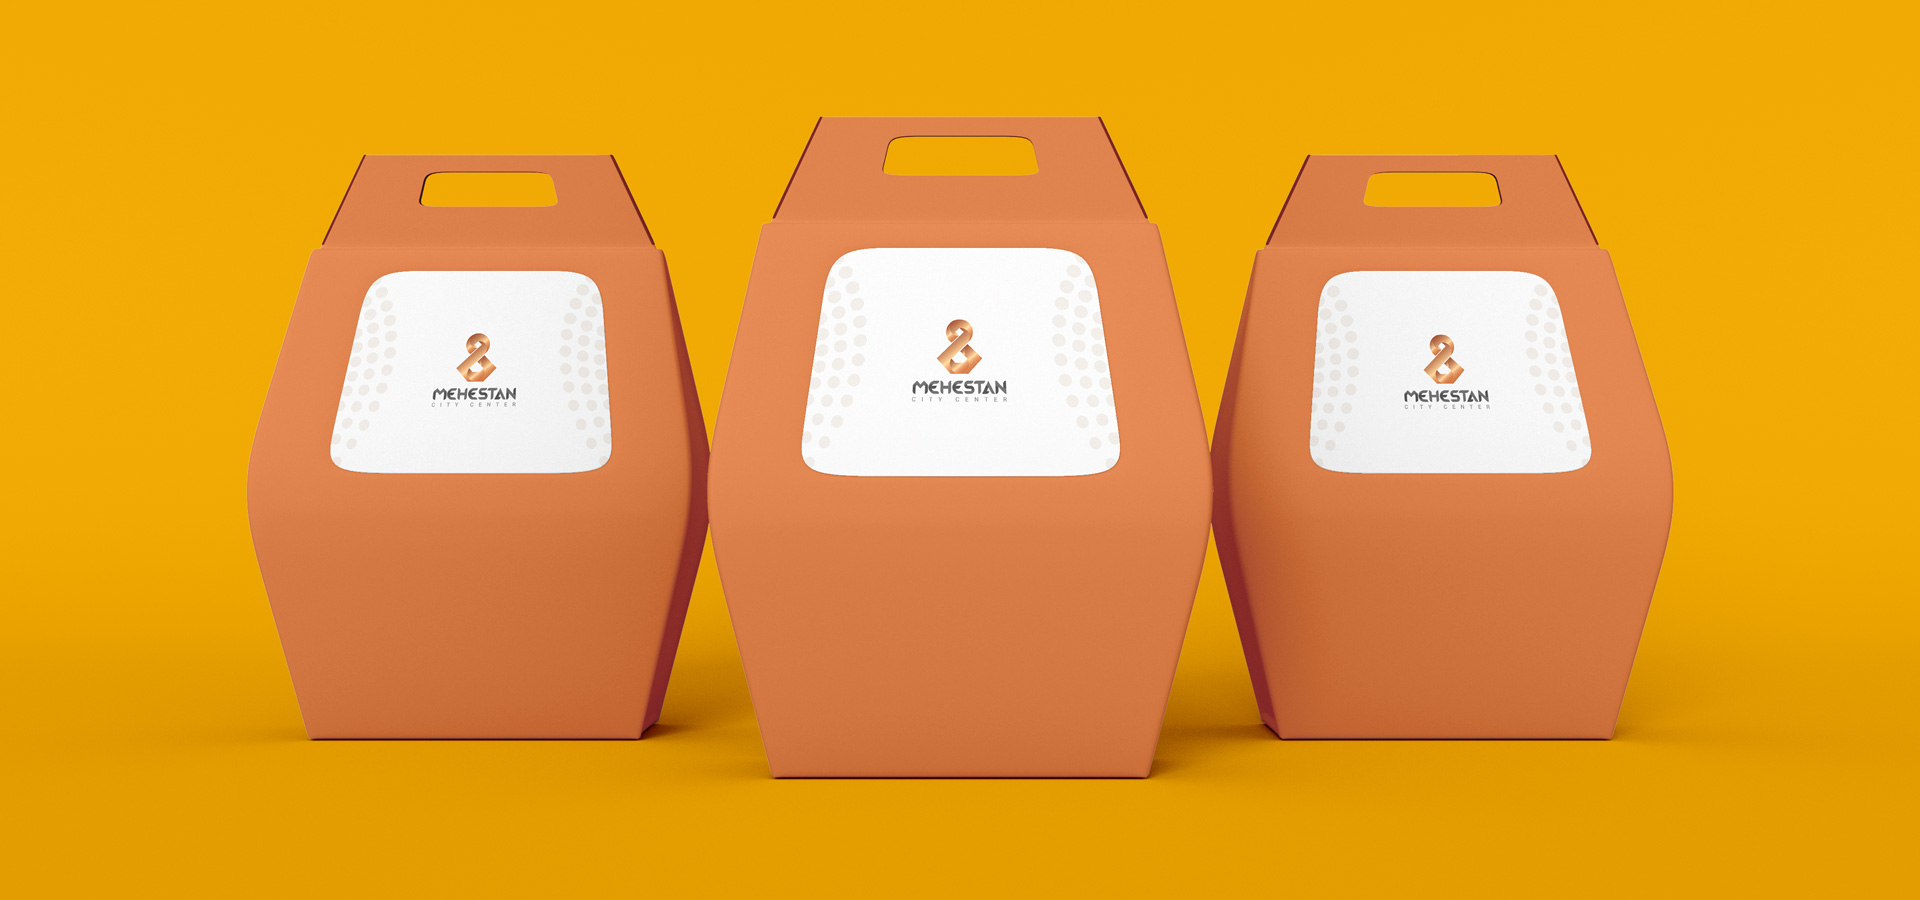 packaging idea for brand design of mehestan project